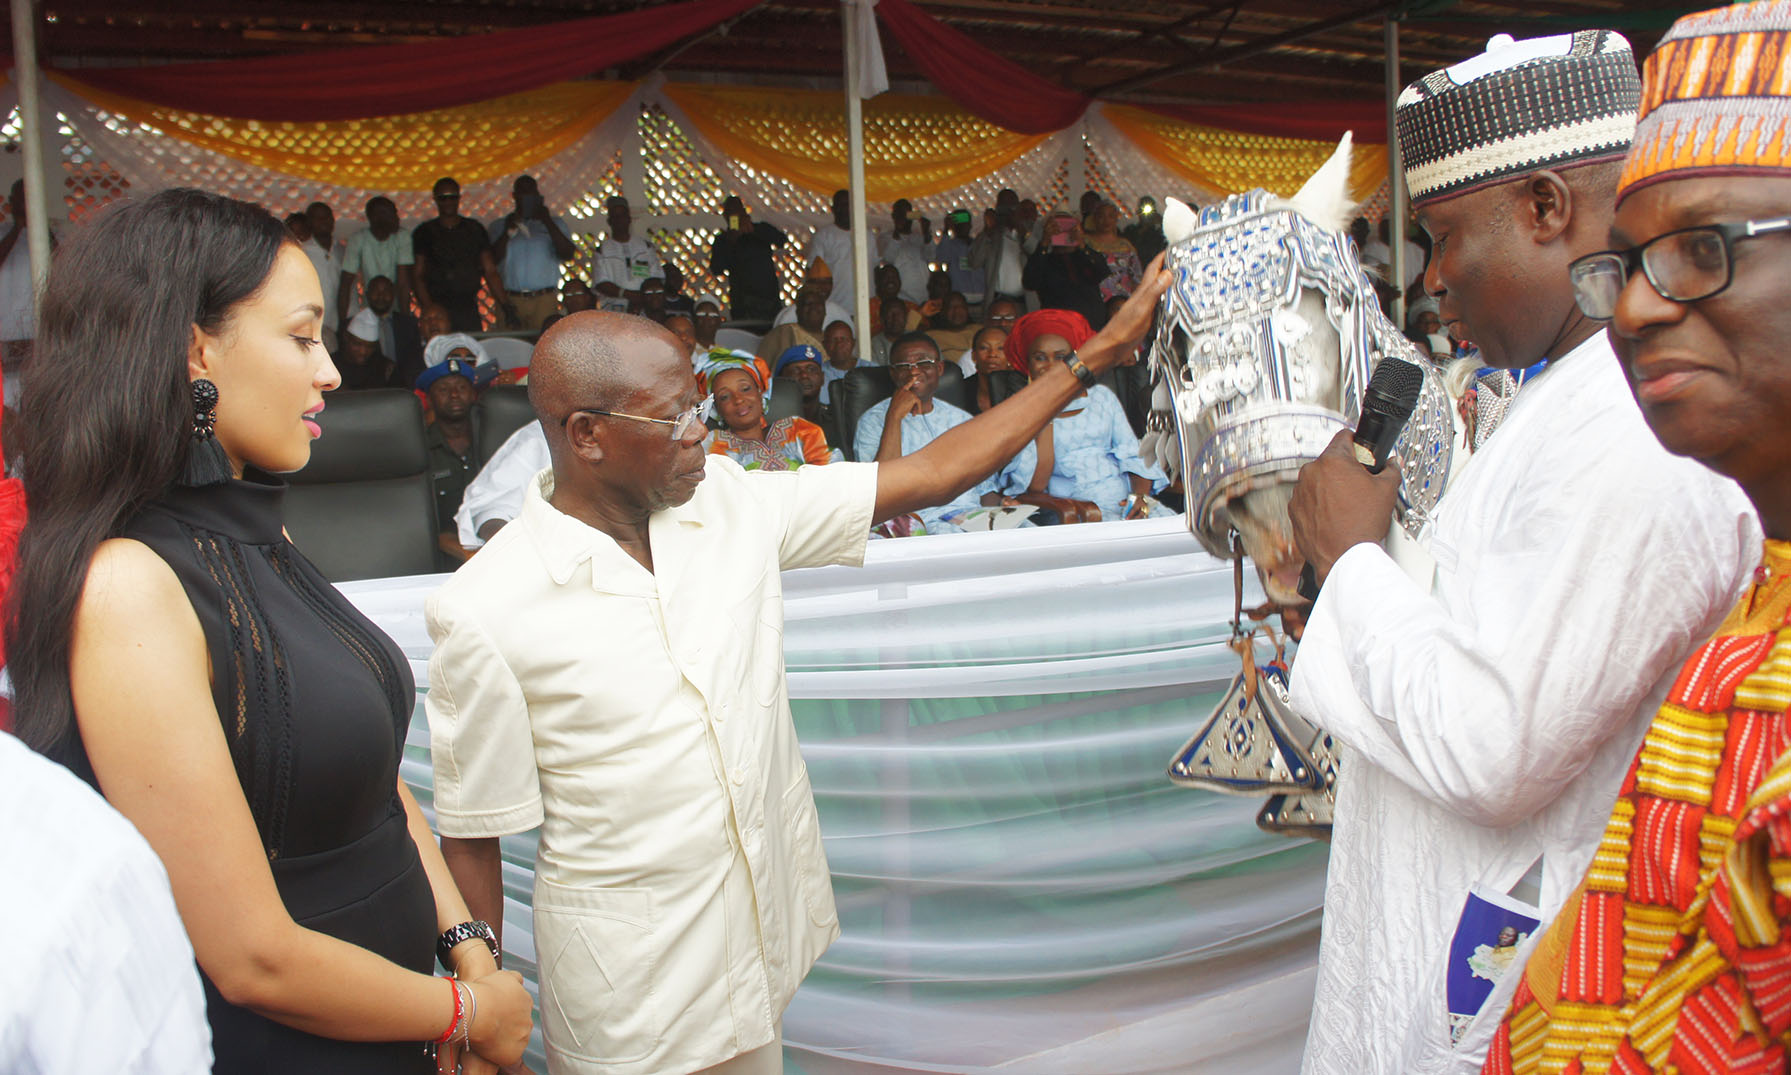 Members of the Organising Committee present a horse to former Governor of Edo State, Comrade Adams Oshiomhole at a grand reception for the former Governor at Auchi, on Saturday, with them is Mrs Iara Oshiomhole, wife of the former Governor.